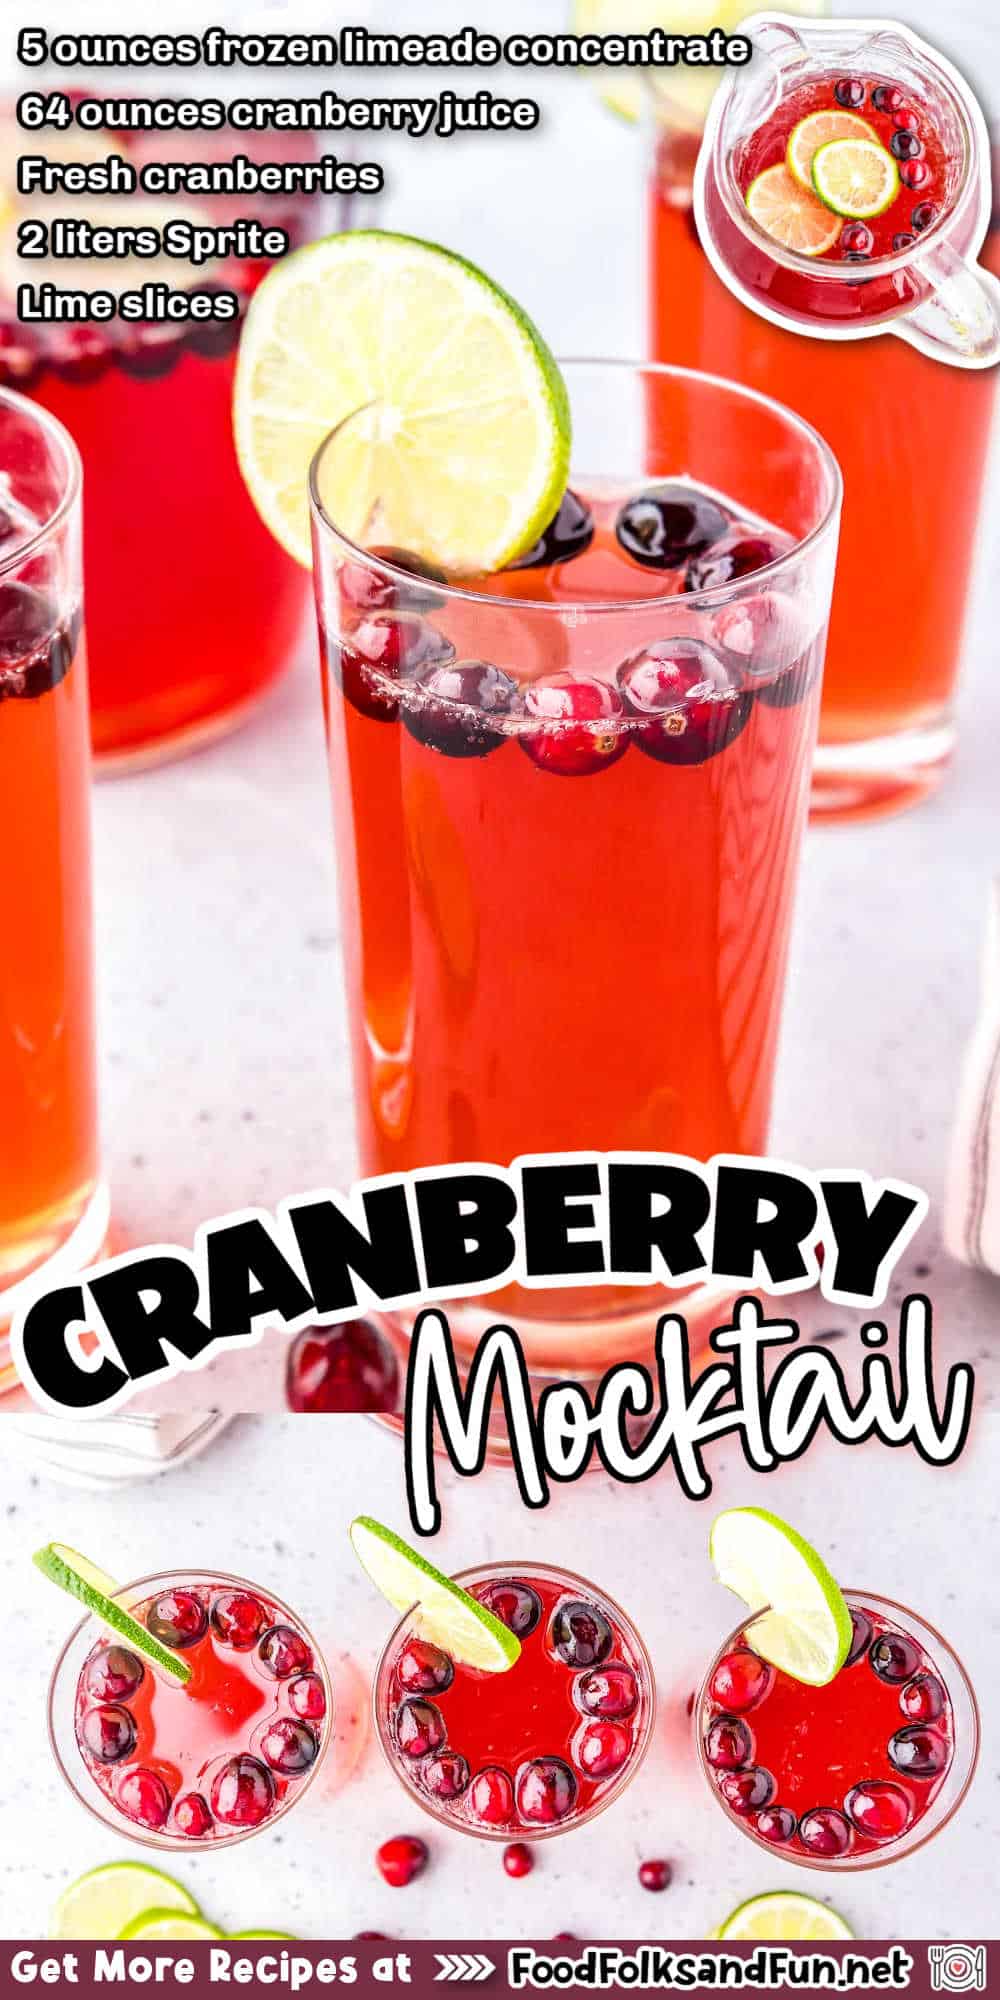 Make this Cranberry Mocktail recipe for your next holiday party. It’s the perfect festive mocktail for winter celebrations! via @foodfolksandfun